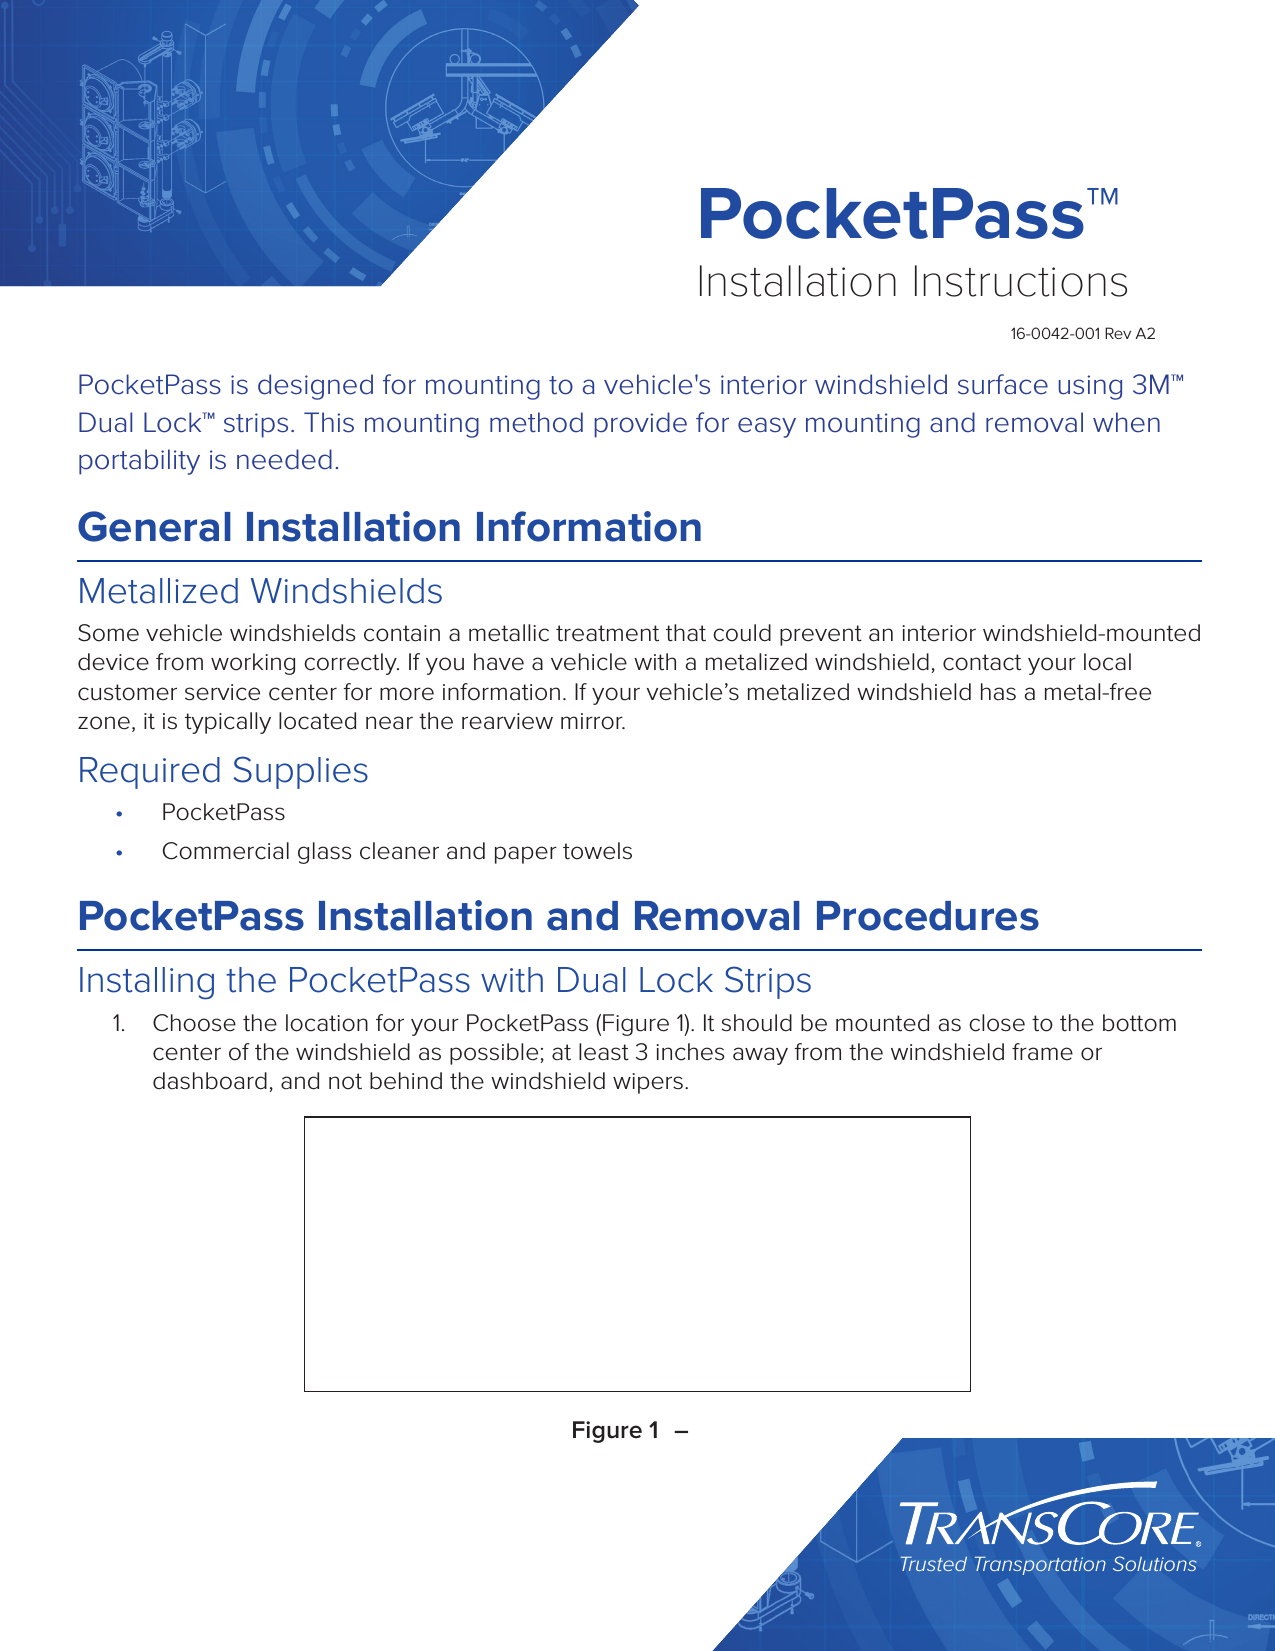 Trusted Transportation SolutionsPocketPass™Installation Instructions16-0042-001 Rev A2PocketPass is designed for mounting to a vehicle&apos;s interior windshield surface using 3M™ Dual Lock™ strips. This mounting method provide for easy mounting and removal when portability is needed.General Installation InformationMetallized WindshieldsSome vehicle windshields contain a metallic treatment that could prevent an interior windshield-mounted device from working correctly. If you have a vehicle with a metalized windshield, contact your local customer service center for more information. If your vehicle’s metalized windshield has a metal-free zone, it is typically located near the rearview mirror.Required Supplies•  PocketPass•  Commercial glass cleaner and paper towelsPocketPass Installation and Removal ProceduresInstalling the PocketPass with Dual Lock Strips1.  Choose the location for your PocketPass (Figure 1). It should be mounted as close to the bottom center of the windshield as possible; at least 3 inches away from the windshield frame or dashboard, and not behind the windshield wipers.Figure 1  – 